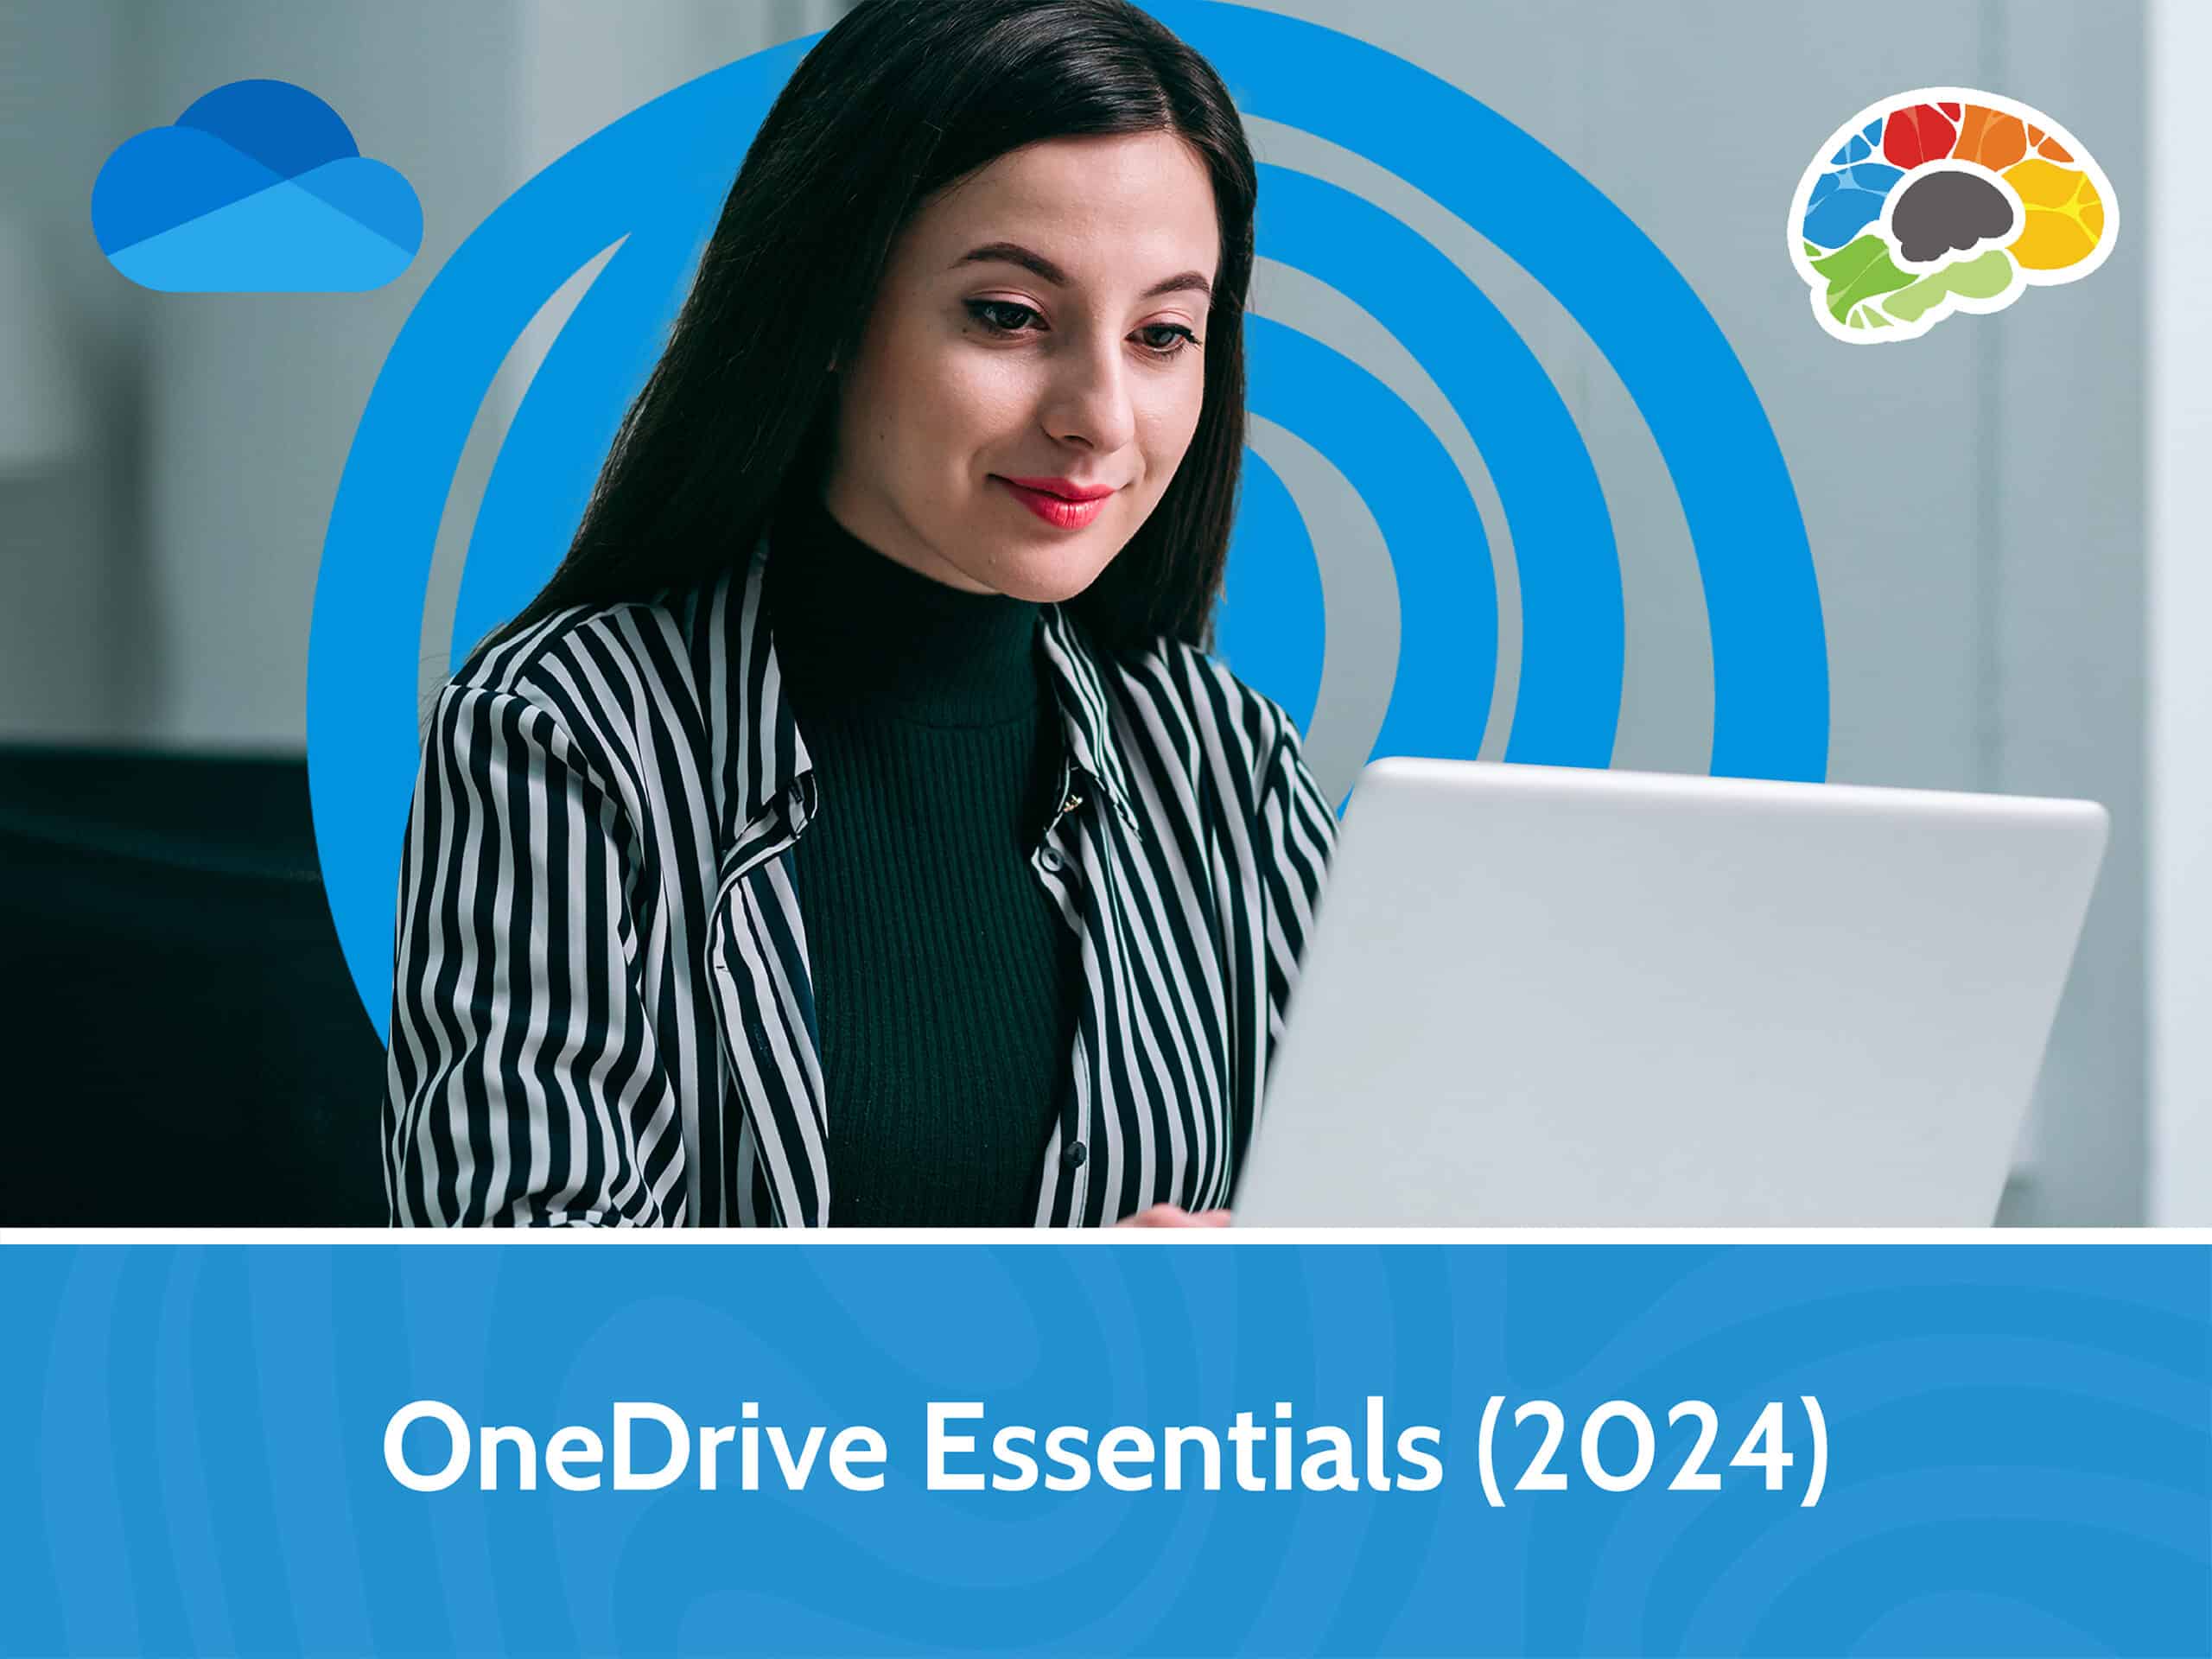 OneDrive Essentials 2024 scaled